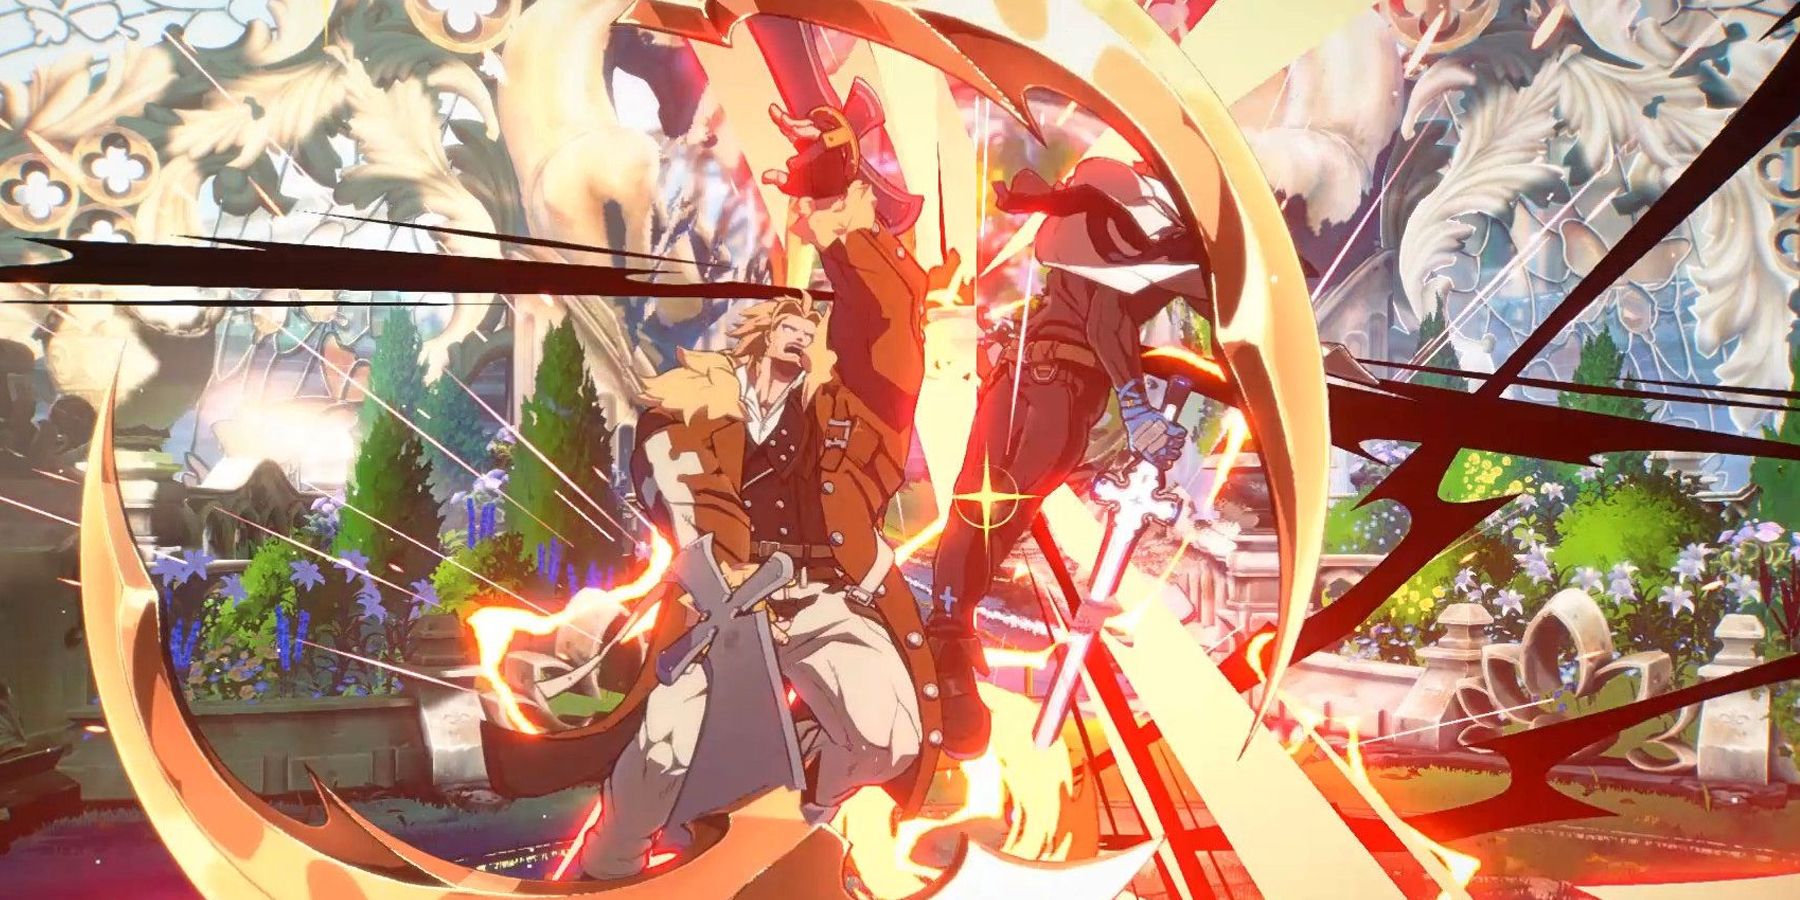 Leo executing a combo in Guilty Gear Strive